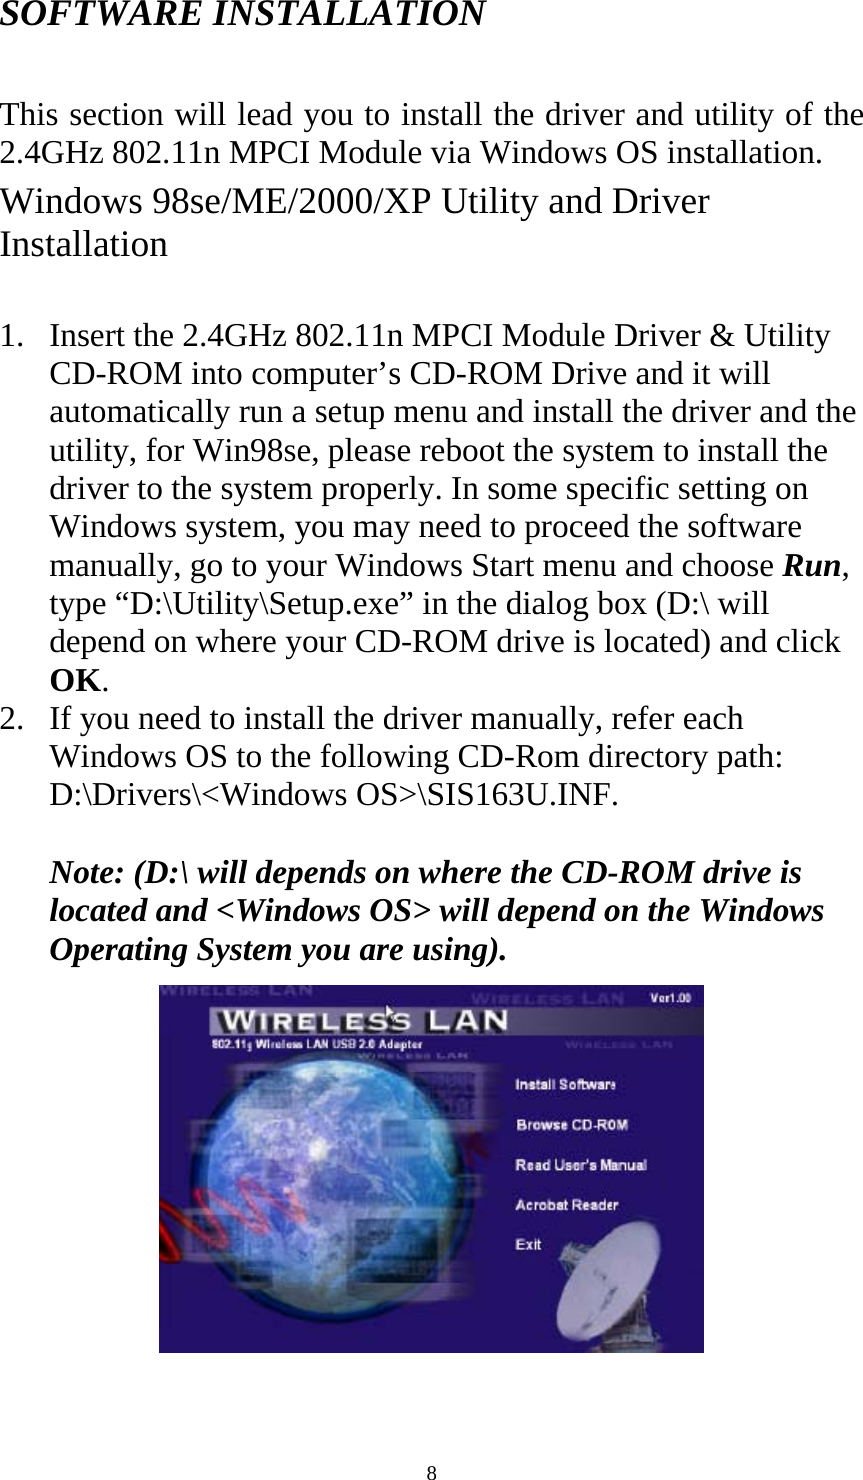  8 SOFTWARE INSTALLATION  This section will lead you to install the driver and utility of the 2.4GHz 802.11n MPCI Module via Windows OS installation.   Windows 98se/ME/2000/XP Utility and Driver Installation  1. Insert the 2.4GHz 802.11n MPCI Module Driver &amp; Utility CD-ROM into computer’s CD-ROM Drive and it will automatically run a setup menu and install the driver and the utility, for Win98se, please reboot the system to install the driver to the system properly. In some specific setting on Windows system, you may need to proceed the software manually, go to your Windows Start menu and choose Run, type “D:\Utility\Setup.exe” in the dialog box (D:\ will depend on where your CD-ROM drive is located) and click OK.  2. If you need to install the driver manually, refer each Windows OS to the following CD-Rom directory path: D:\Drivers\&lt;Windows OS&gt;\SIS163U.INF.    Note: (D:\ will depends on where the CD-ROM drive is located and &lt;Windows OS&gt; will depend on the Windows Operating System you are using).    